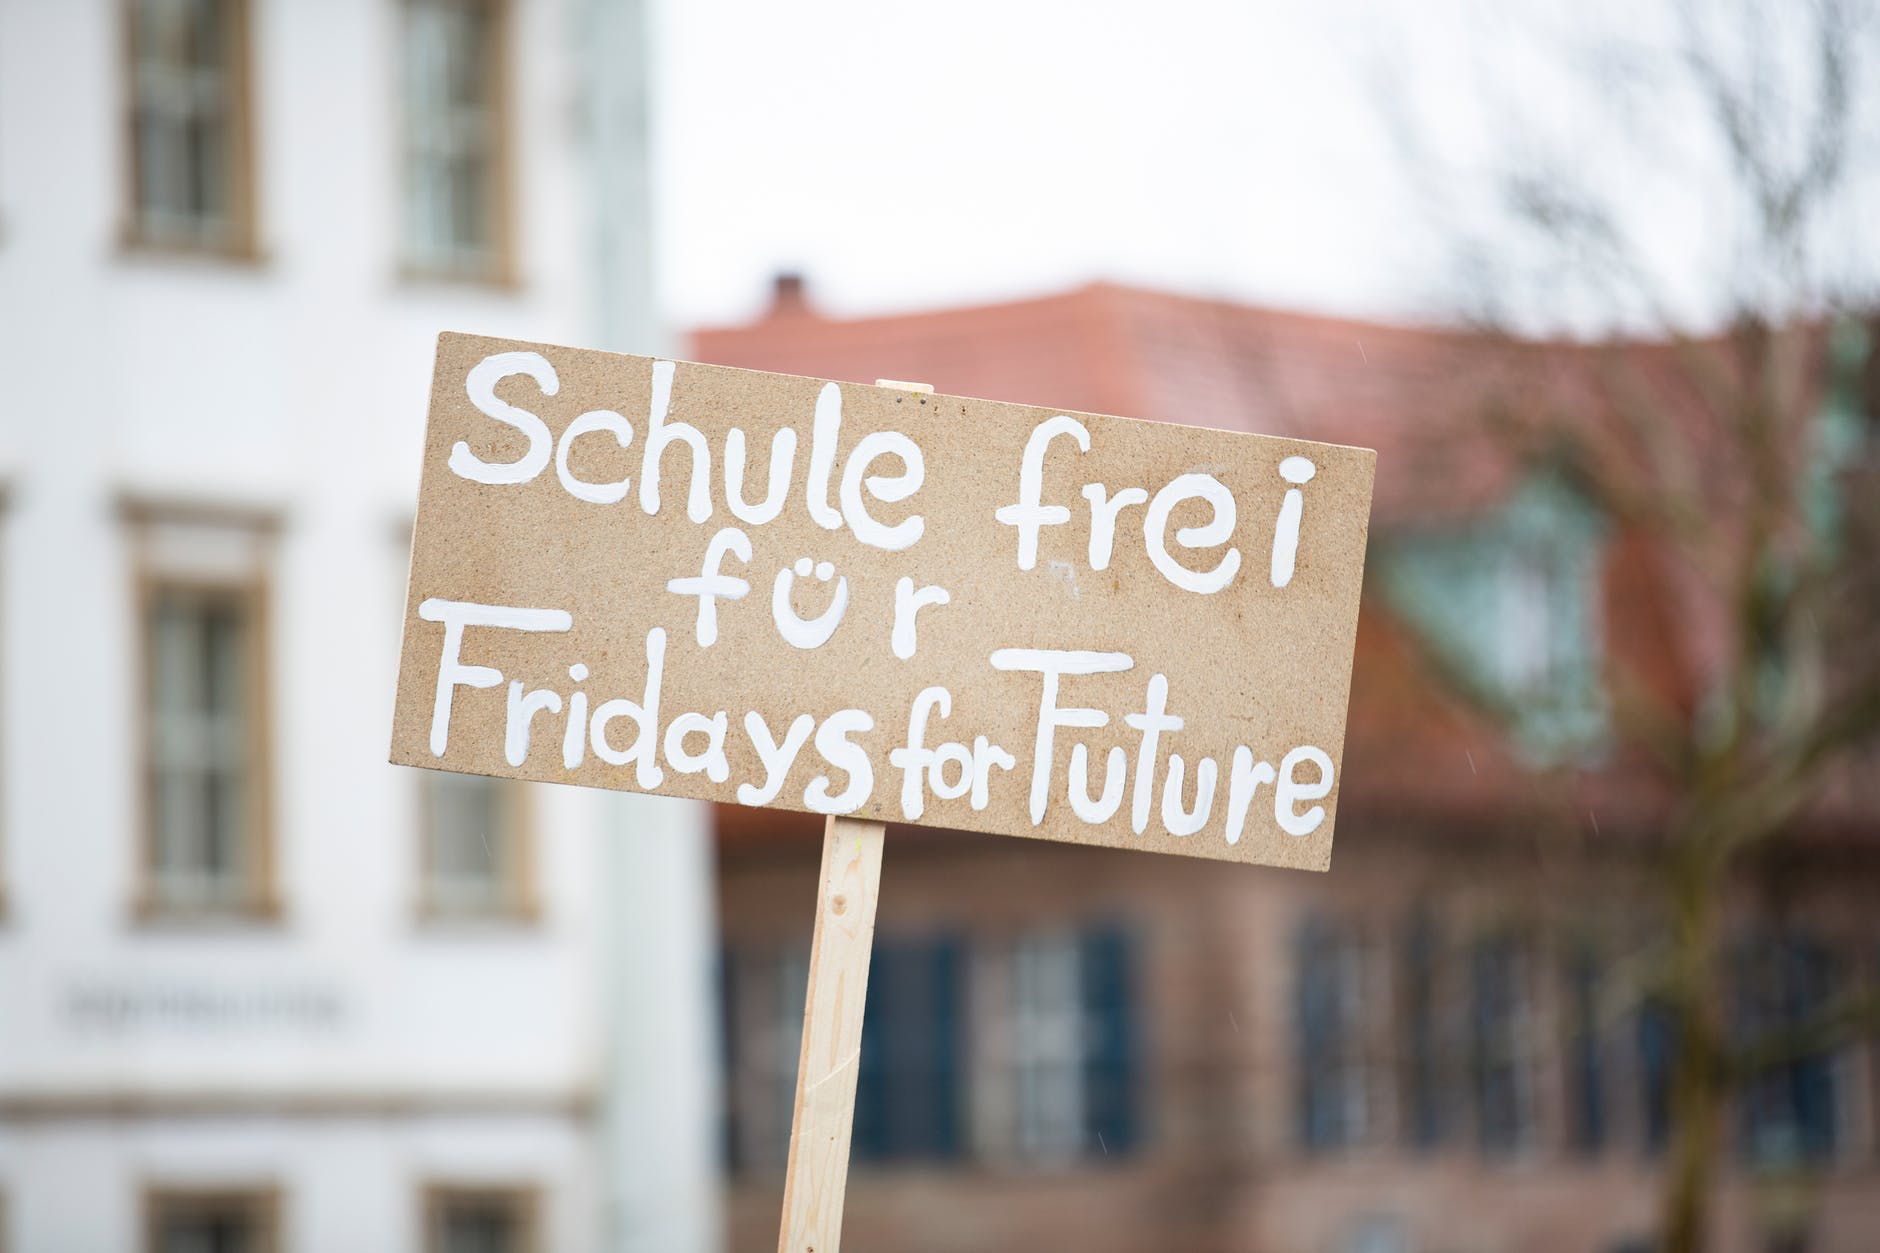 Fridays for future